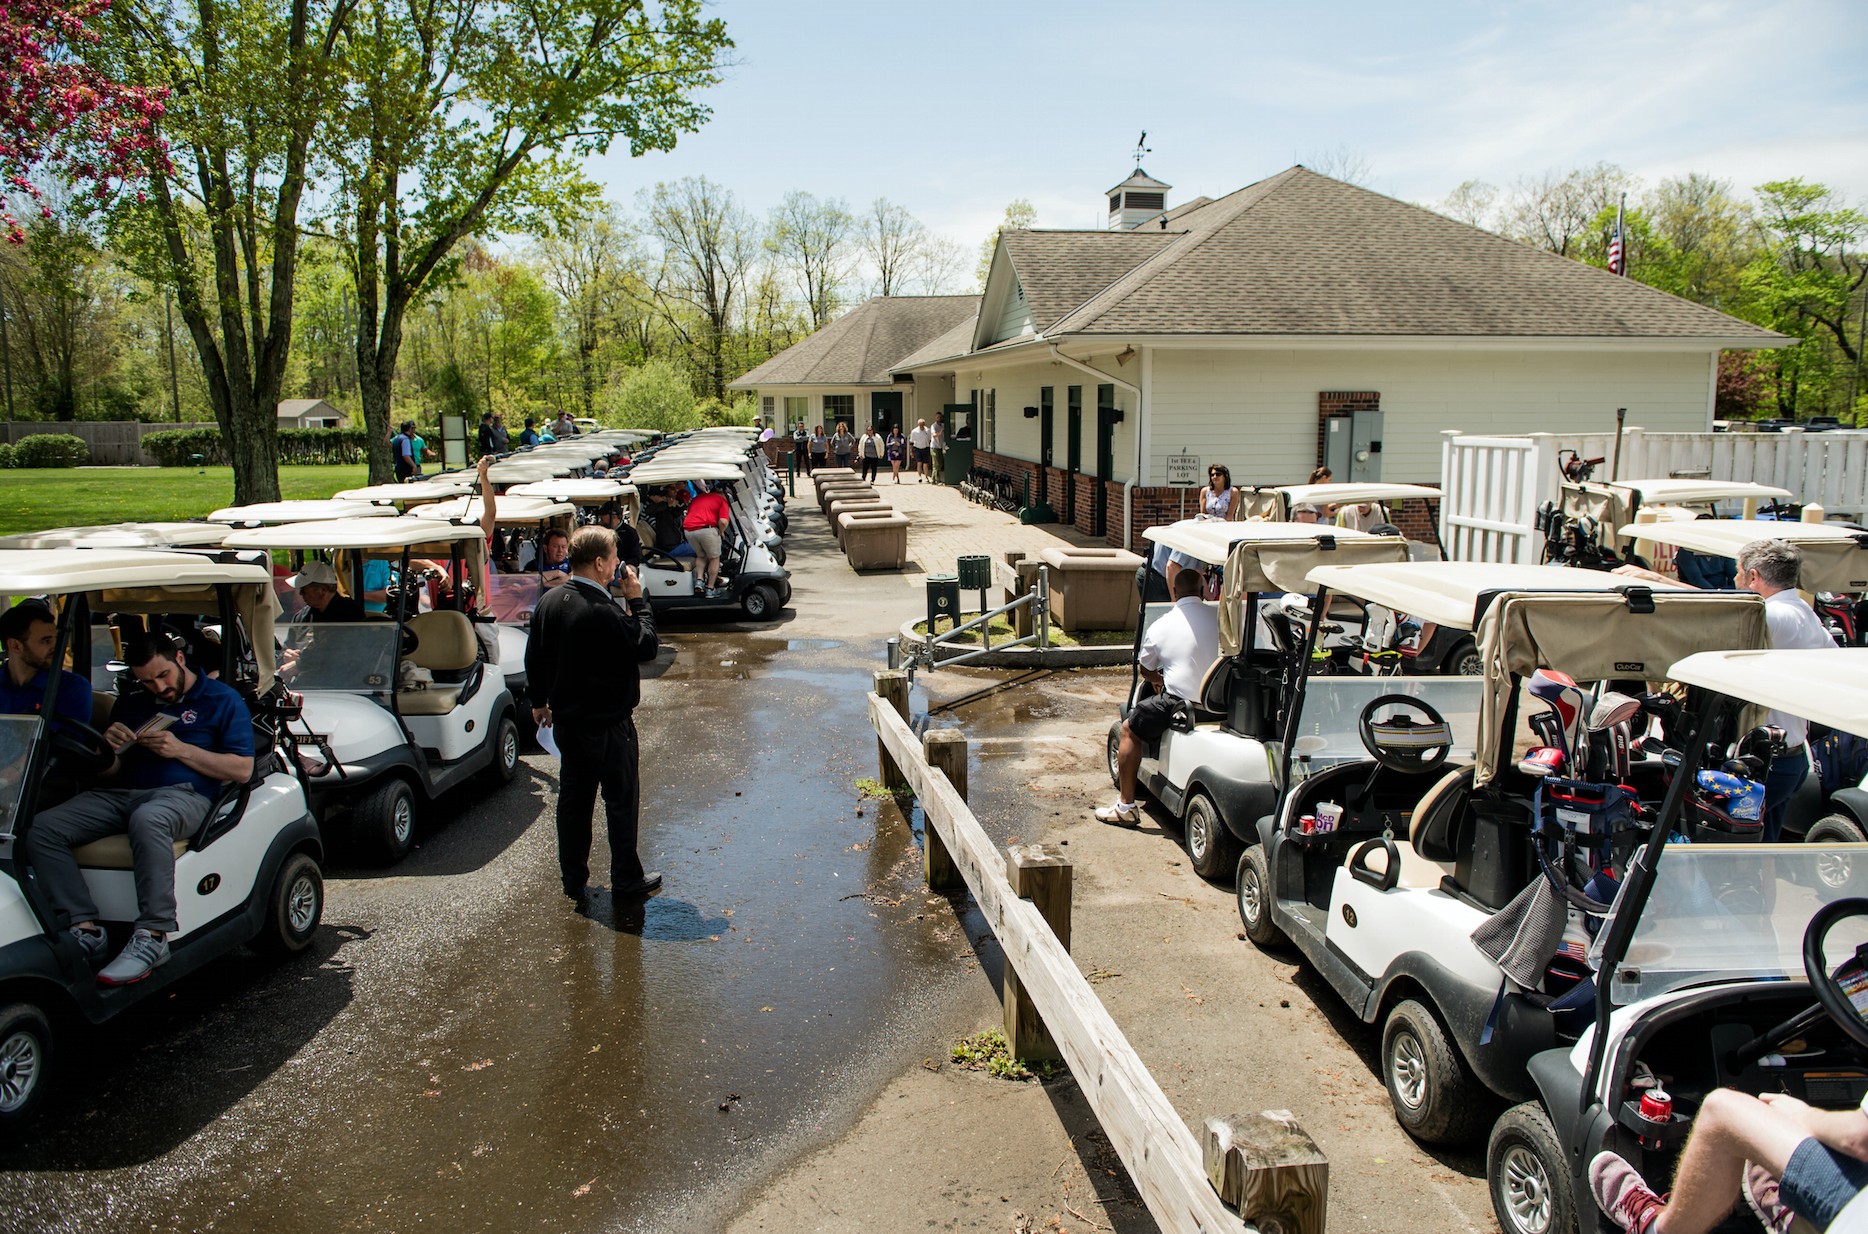 First Annual Weevster 18 Golf Outing. May 6, 2019 Photo: Will Lanzoni